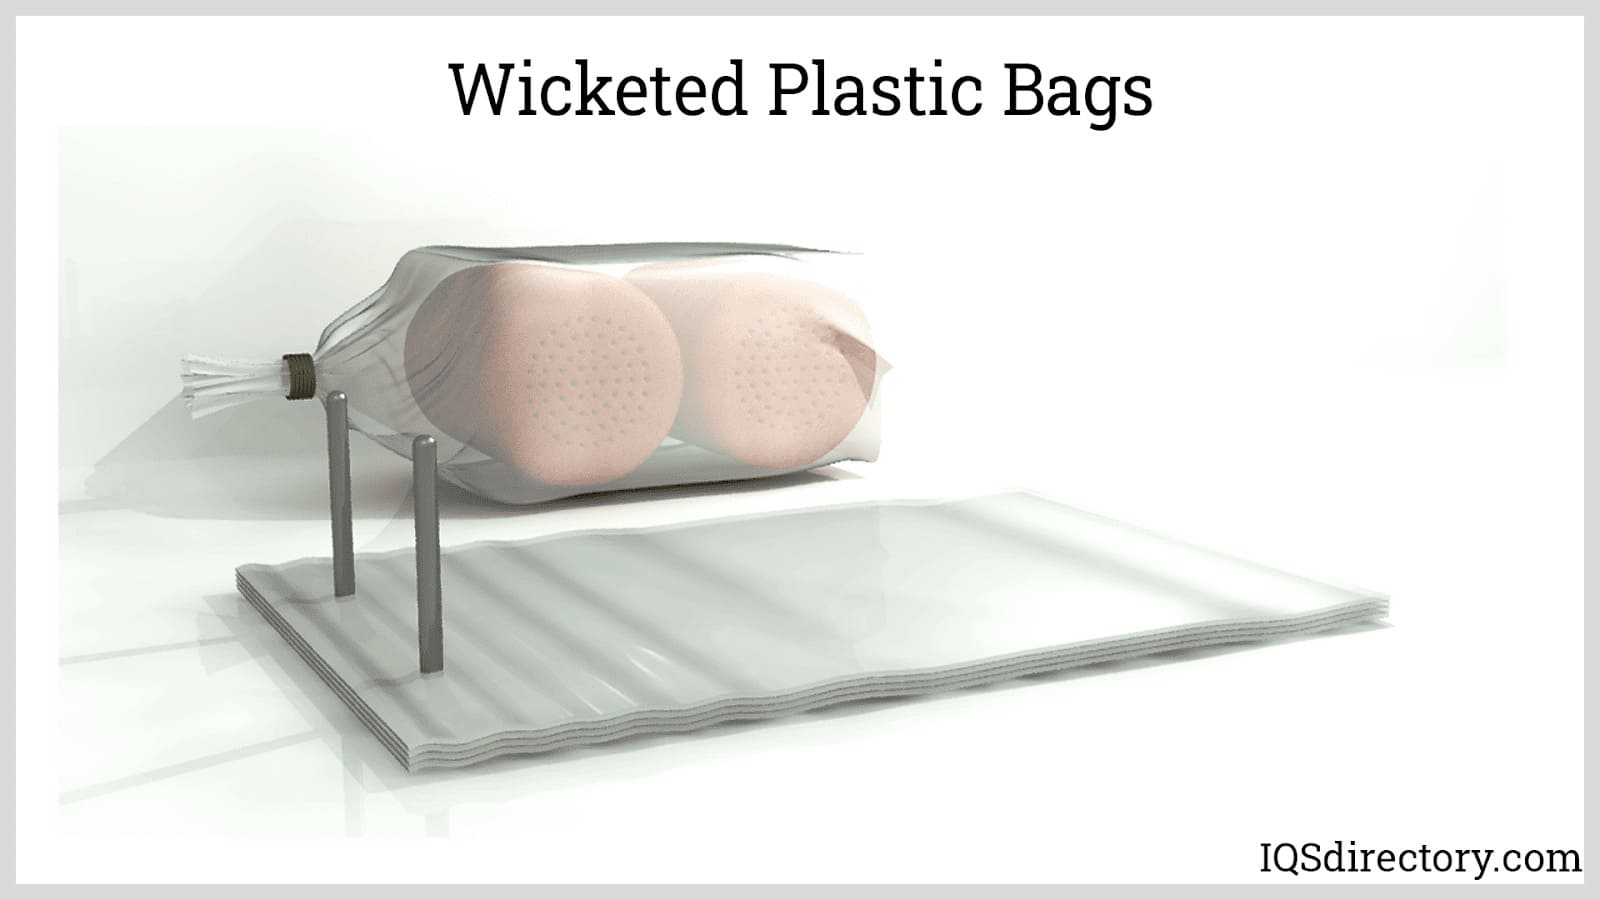 Wicketed Plastic Bags